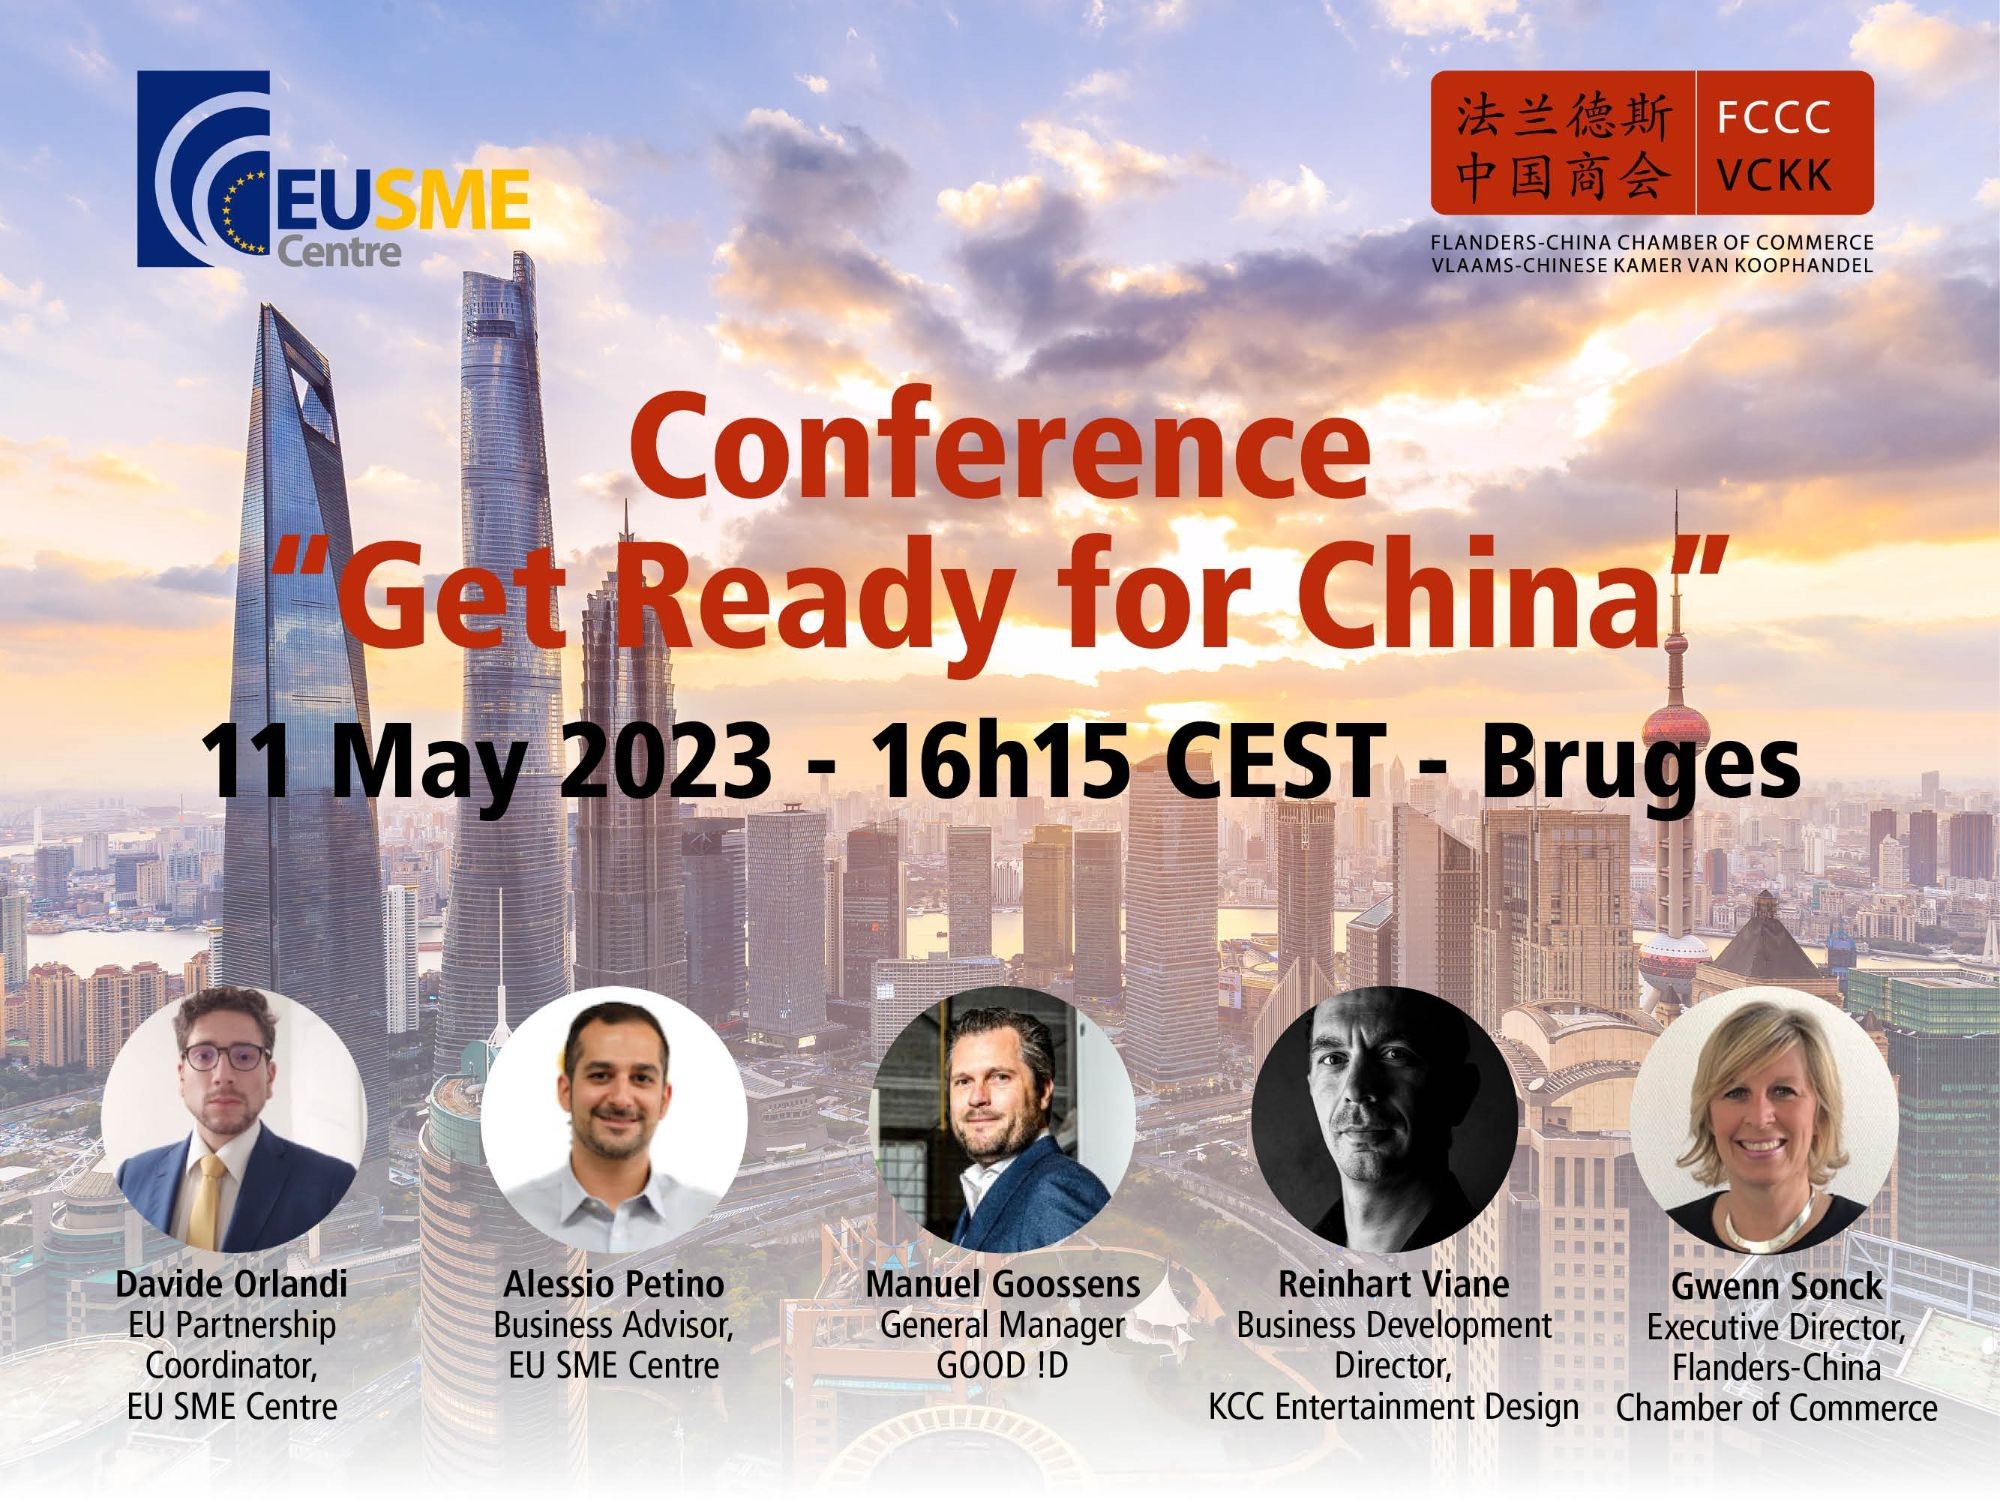 Conference: Get Ready for China - 11 May 2023 - 16h15 CEST - Bruges